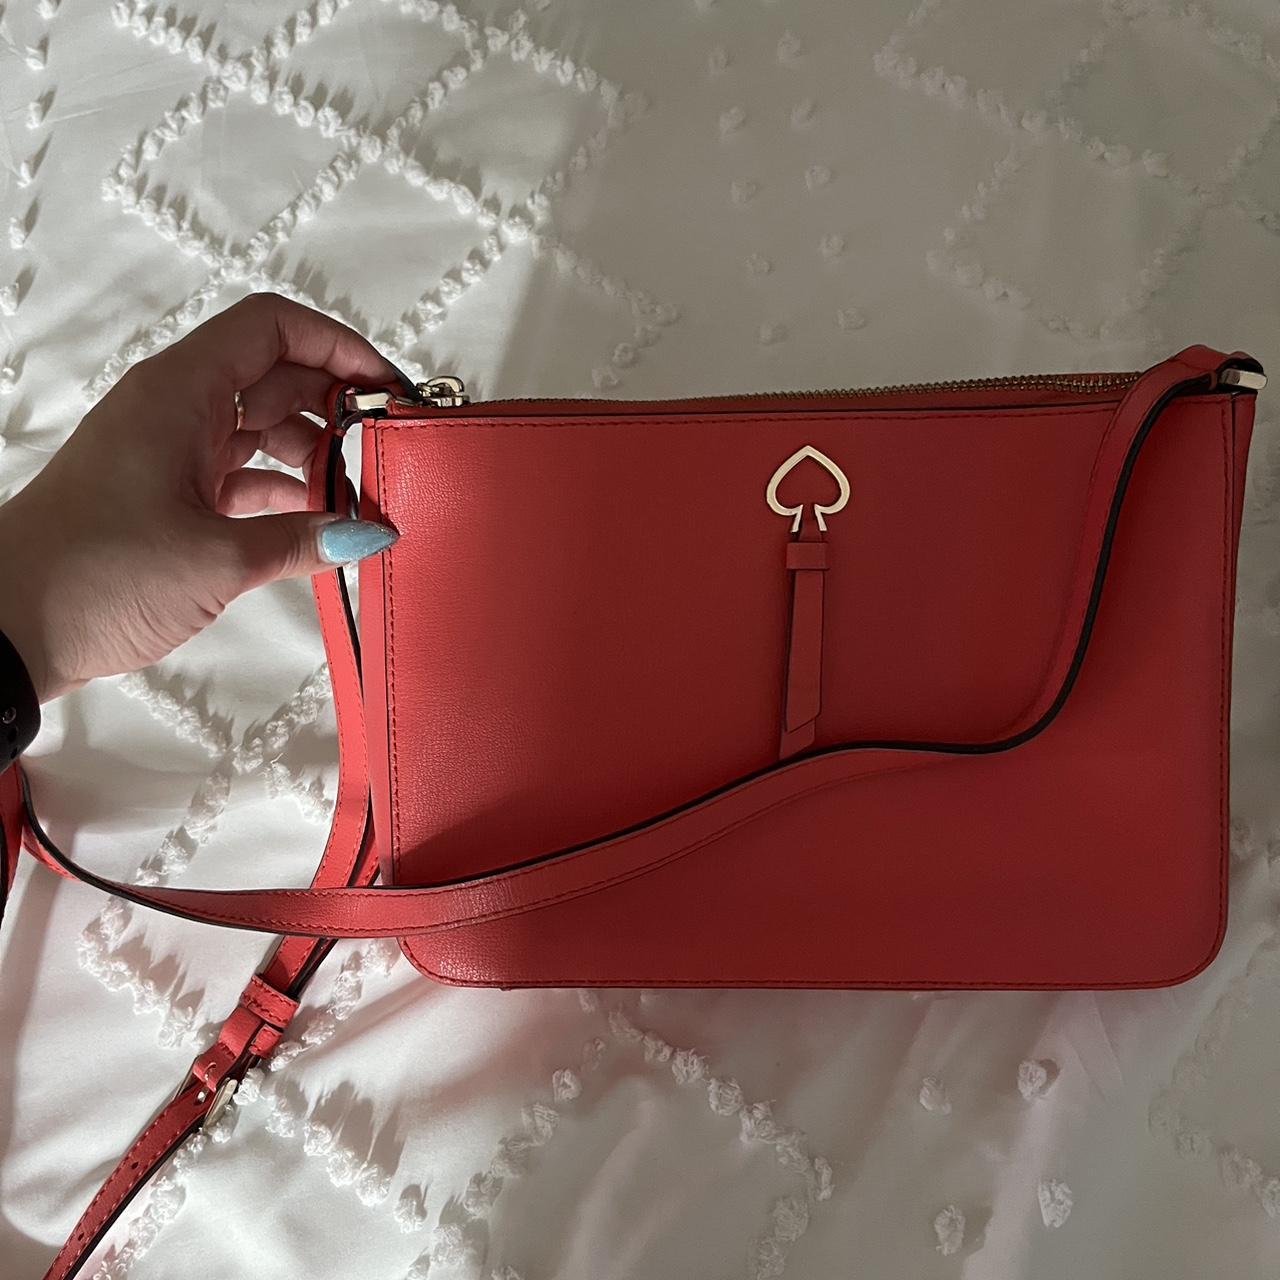 Authethic KATE SPADE Red Coral Handbag Preloved & In Very Good Condition,  Women's Fashion, Bags & Wallets, Cross-body Bags on Carousell